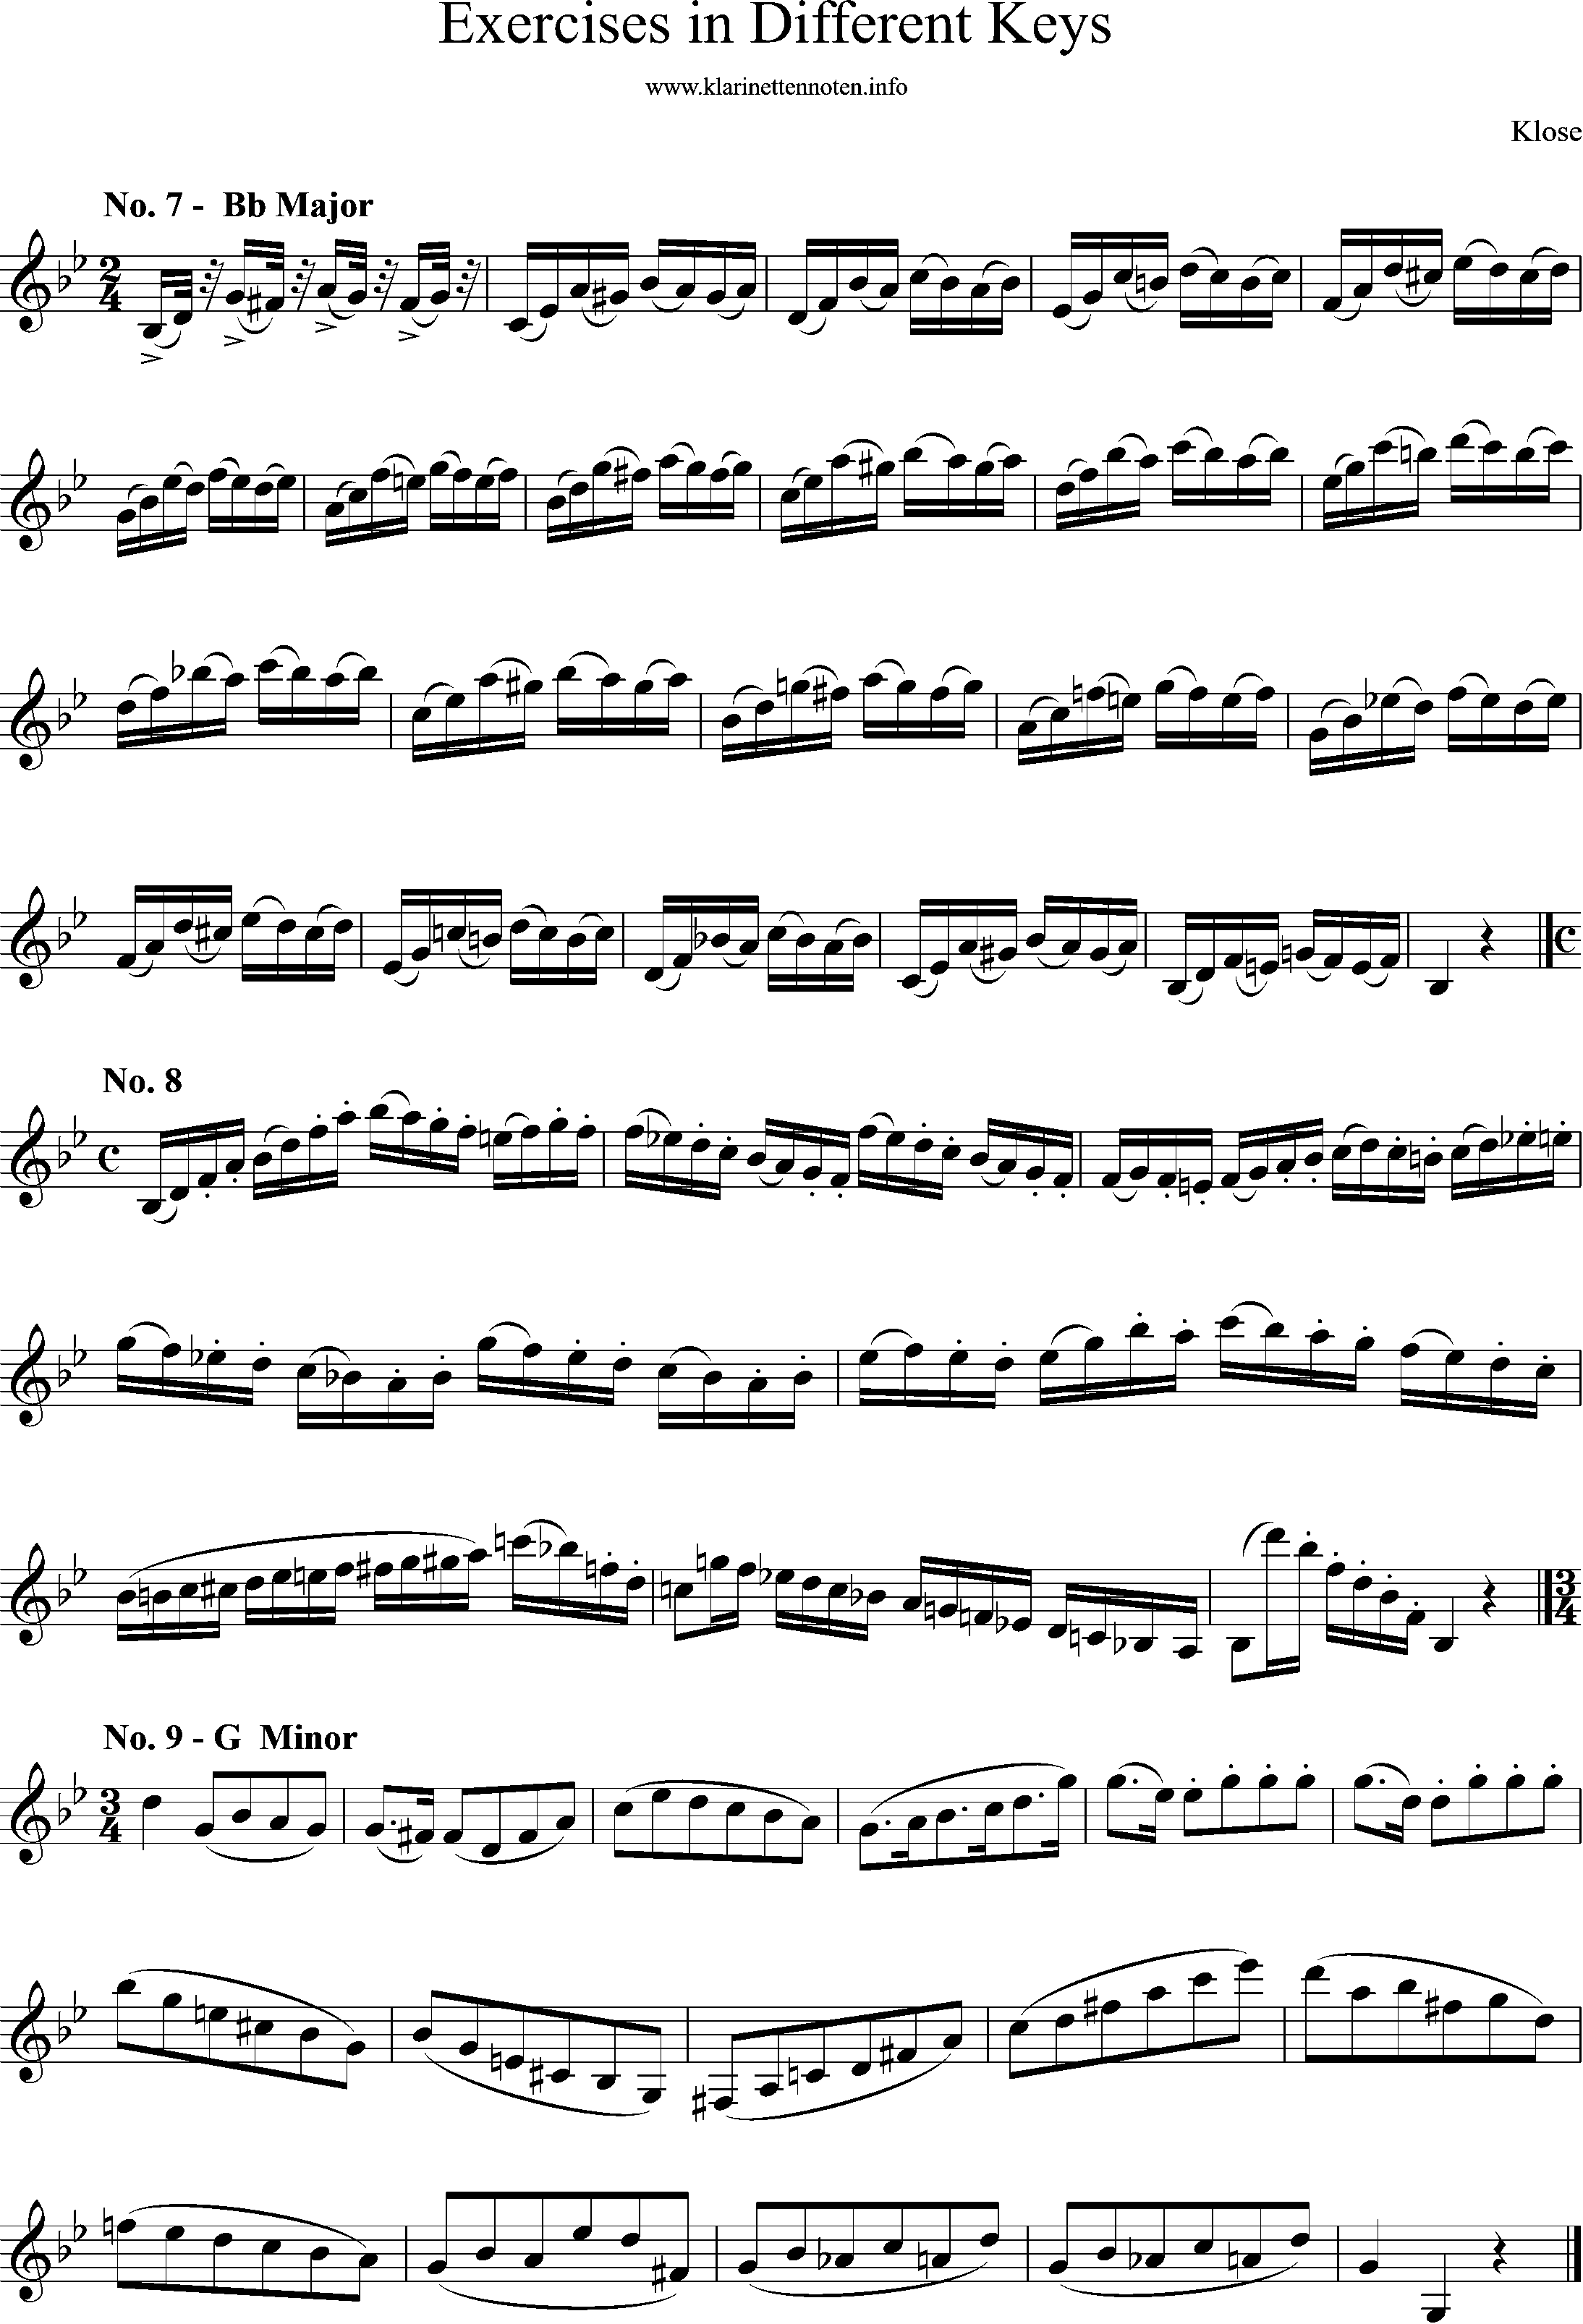 Exercises in Differewnt Keys, klose, No-7-9, Bb-Major